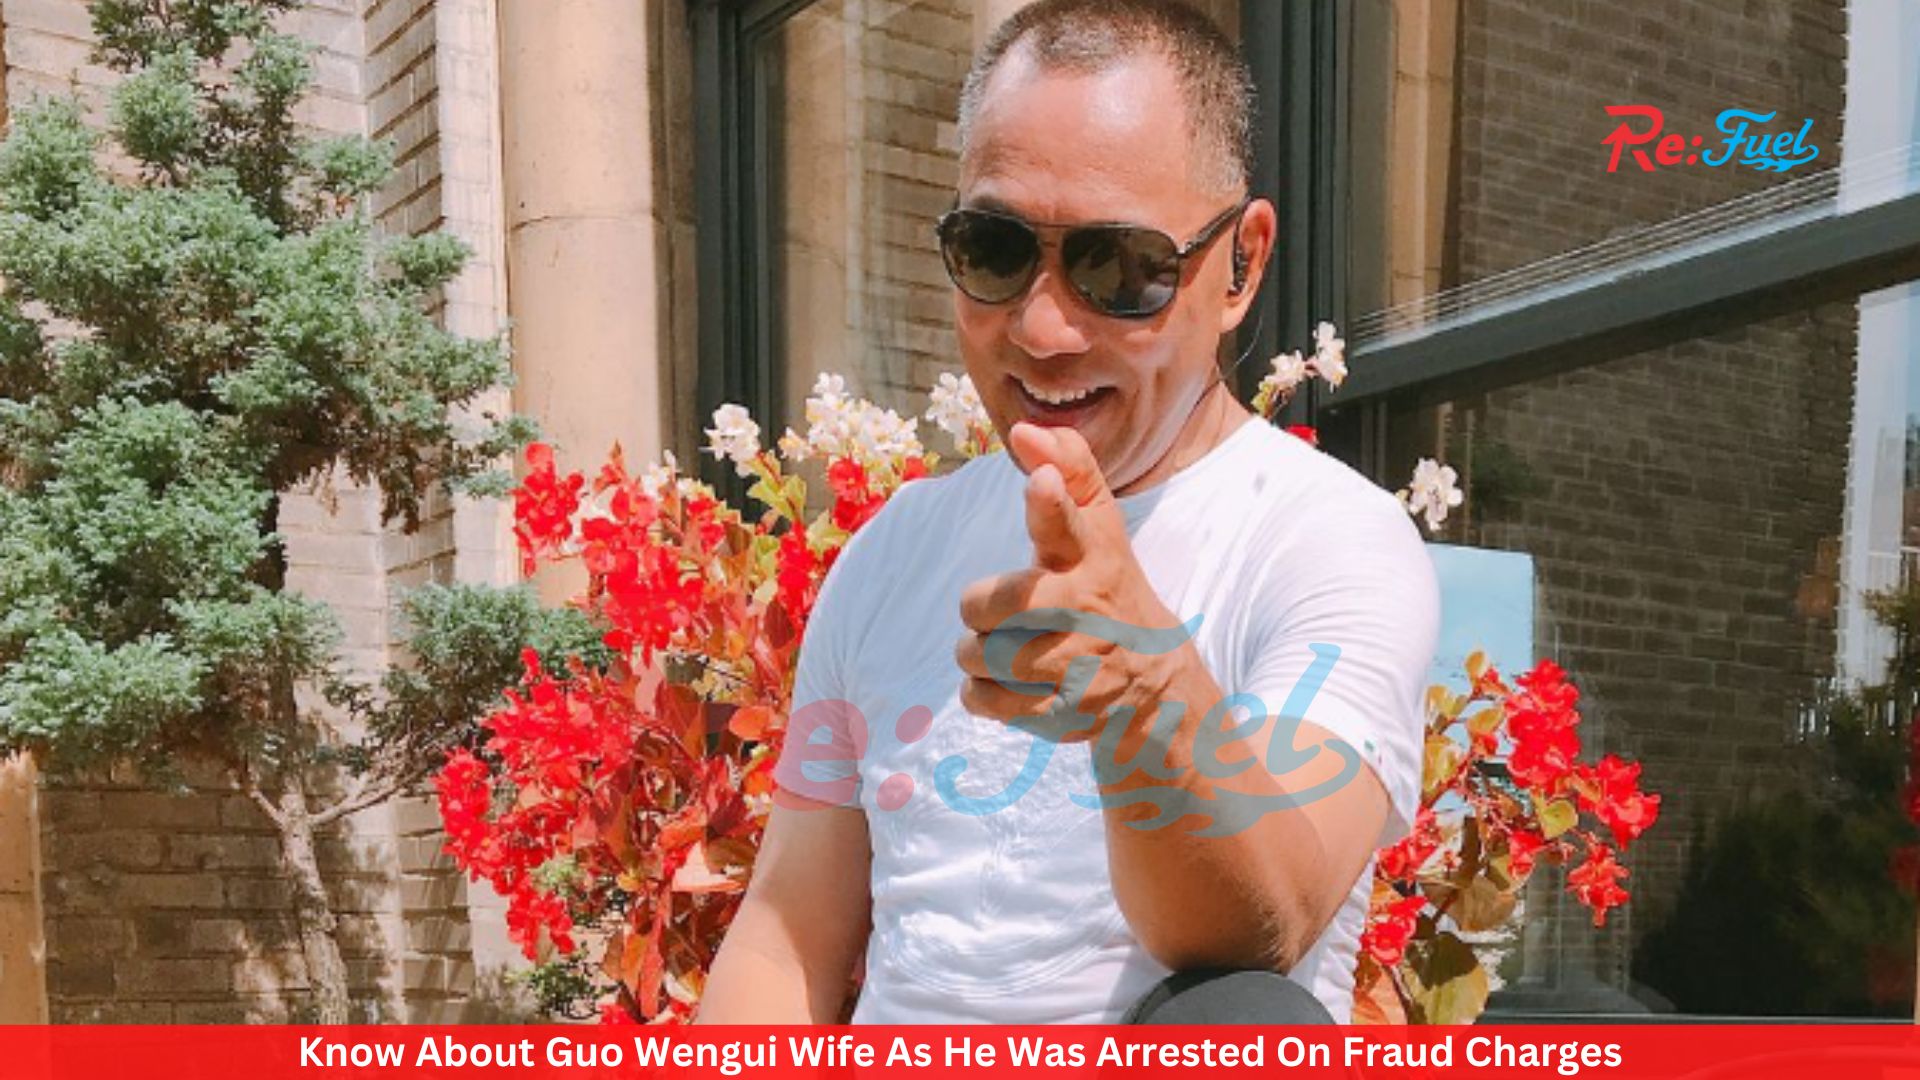 Know About Guo Wengui Wife As He Was Arrested On Fraud Charges